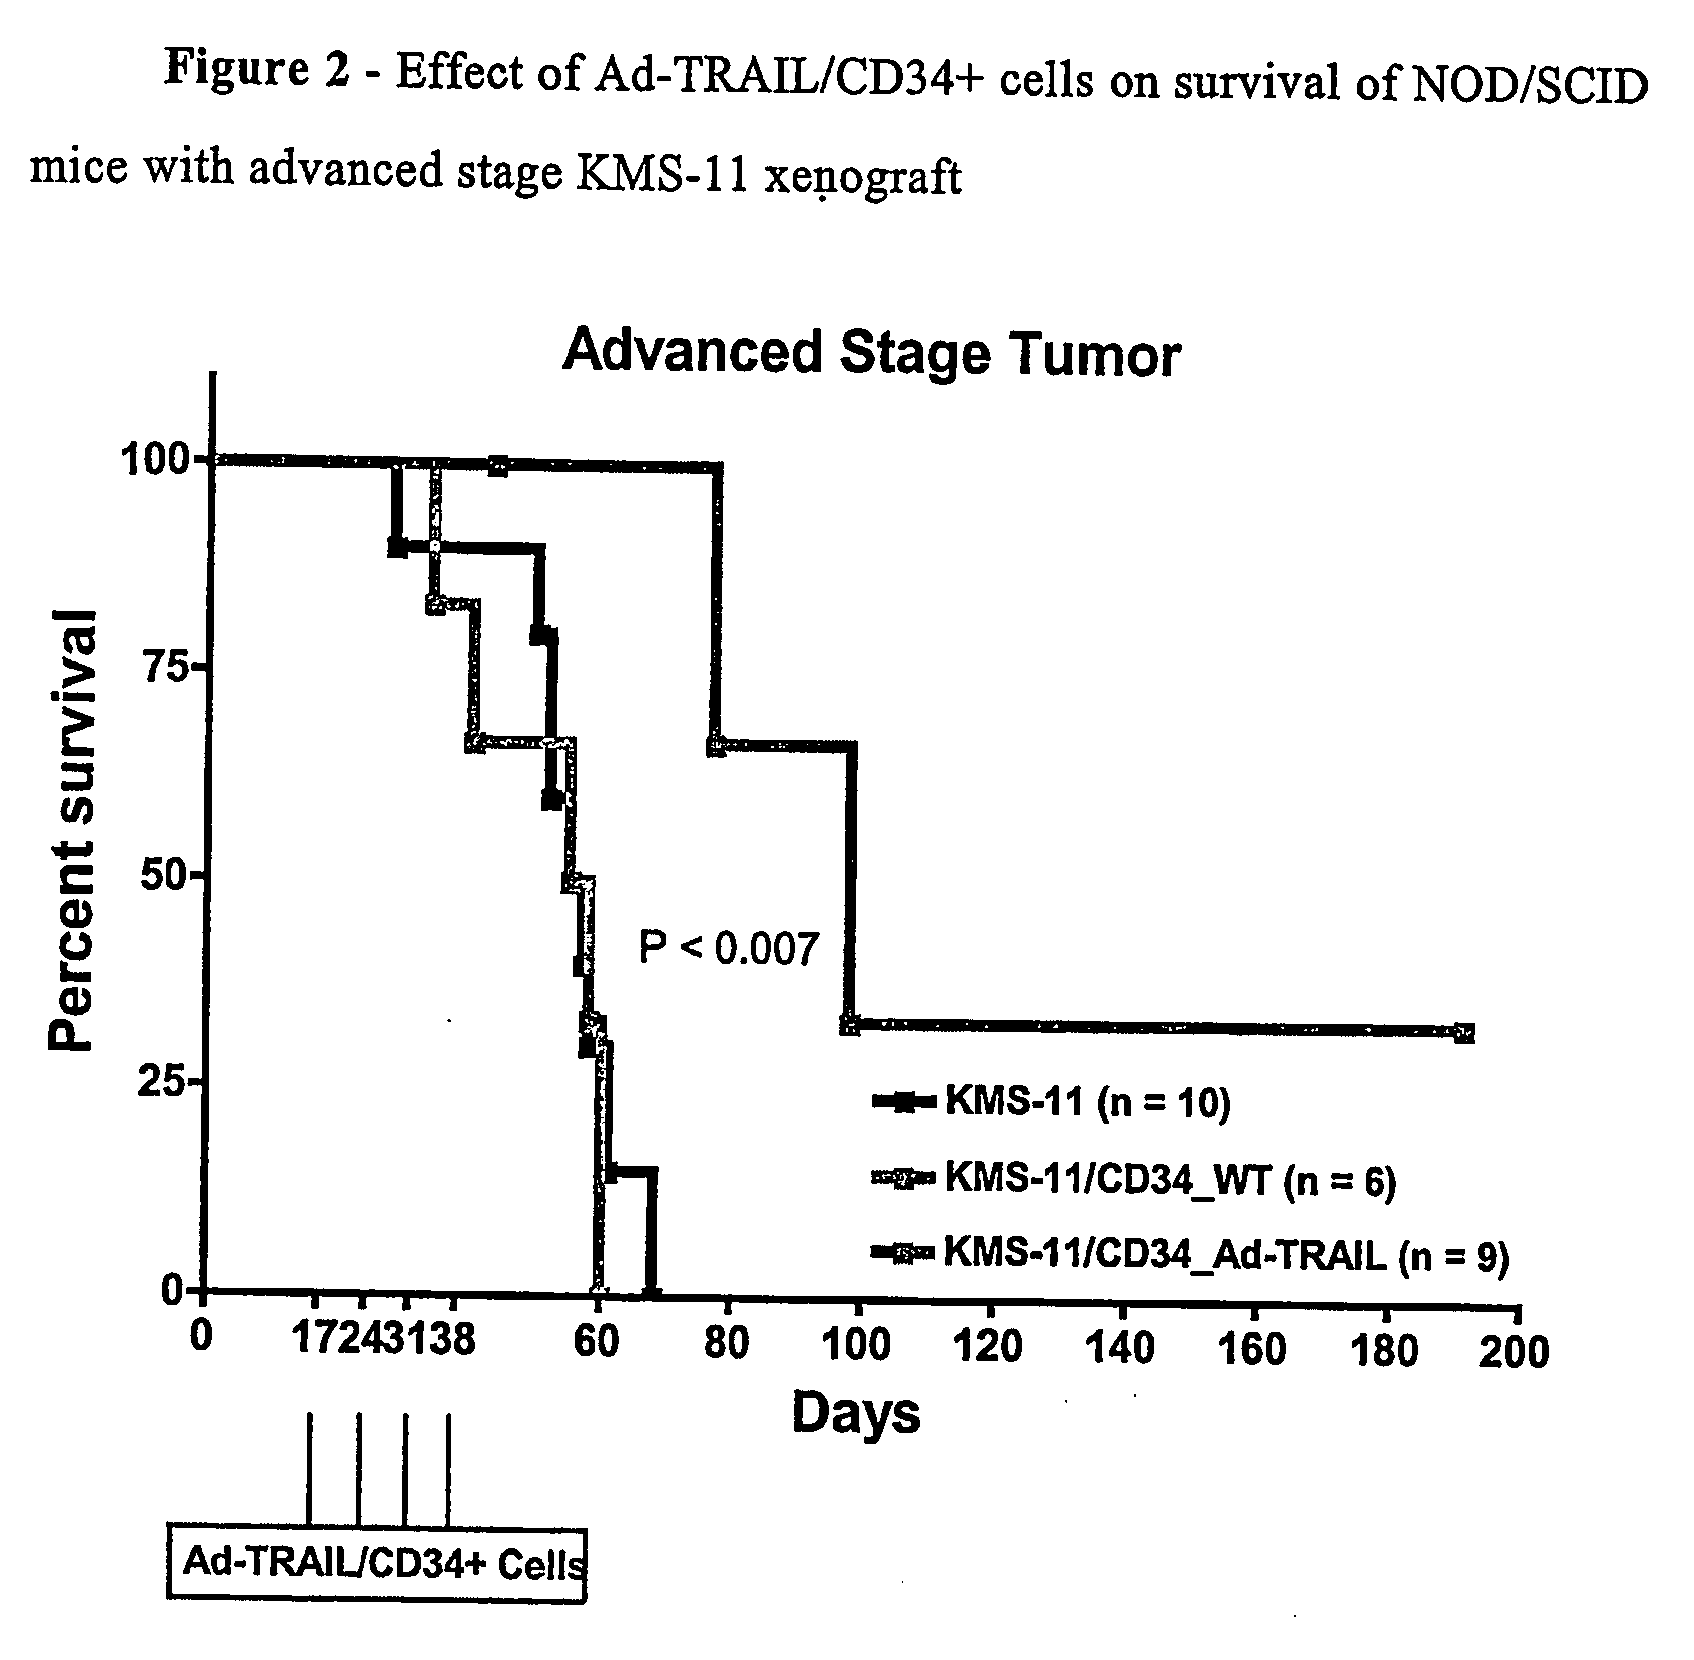 Tumor-Homing Cells Engineered to Produce Tumor Necrosis Factor-Related Apoptosis-Inducing Ligand (Trail) by Adenoviral-Mediated Gene Transfer